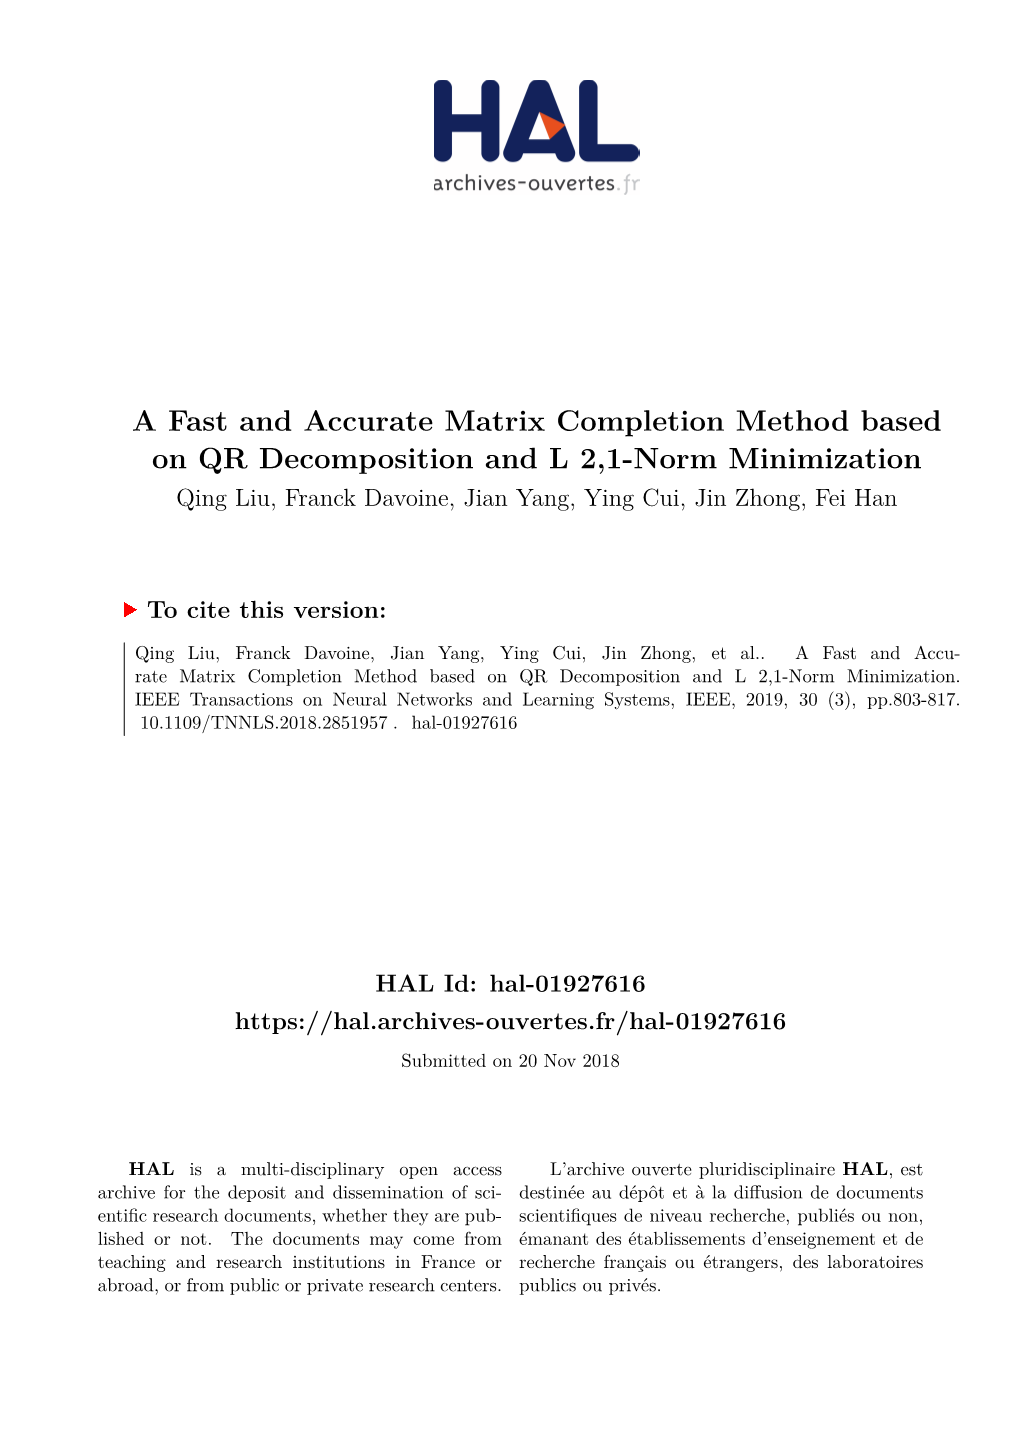 A Fast and Accurate Matrix Completion Method Based on QR Decomposition and L 2,1-Norm Minimization Qing Liu, Franck Davoine, Jian Yang, Ying Cui, Jin Zhong, Fei Han